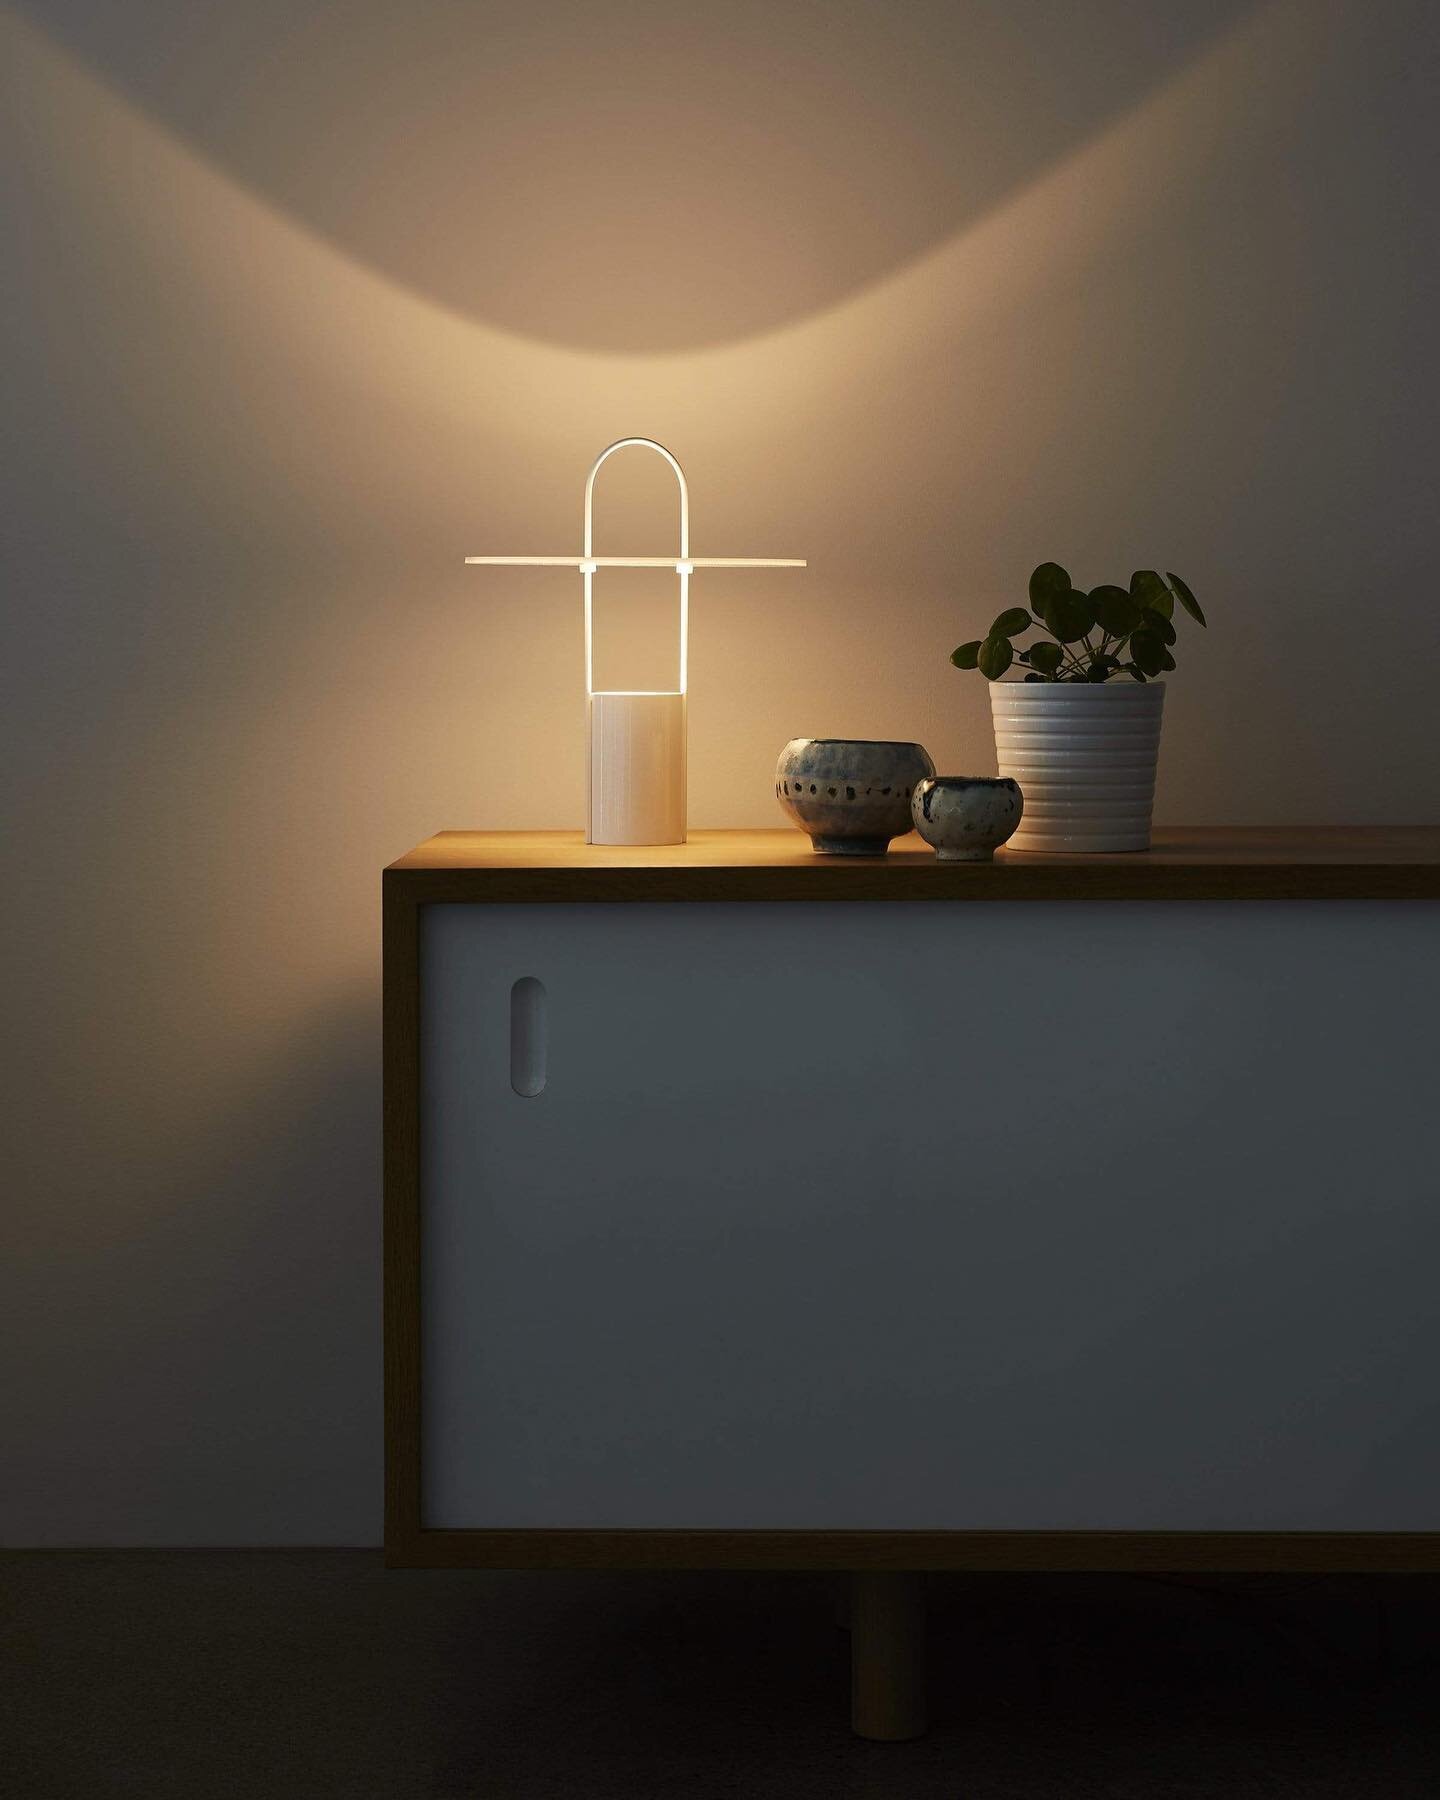 This is Nomade. The 2020 L A M P Competition entry that was chosen for an exclusive manufacturing deal through our partnership with @designmilk in collaboration with @hollisandmorris 

Available for purchase on the Design Milk shop! 

Nomade is a sty